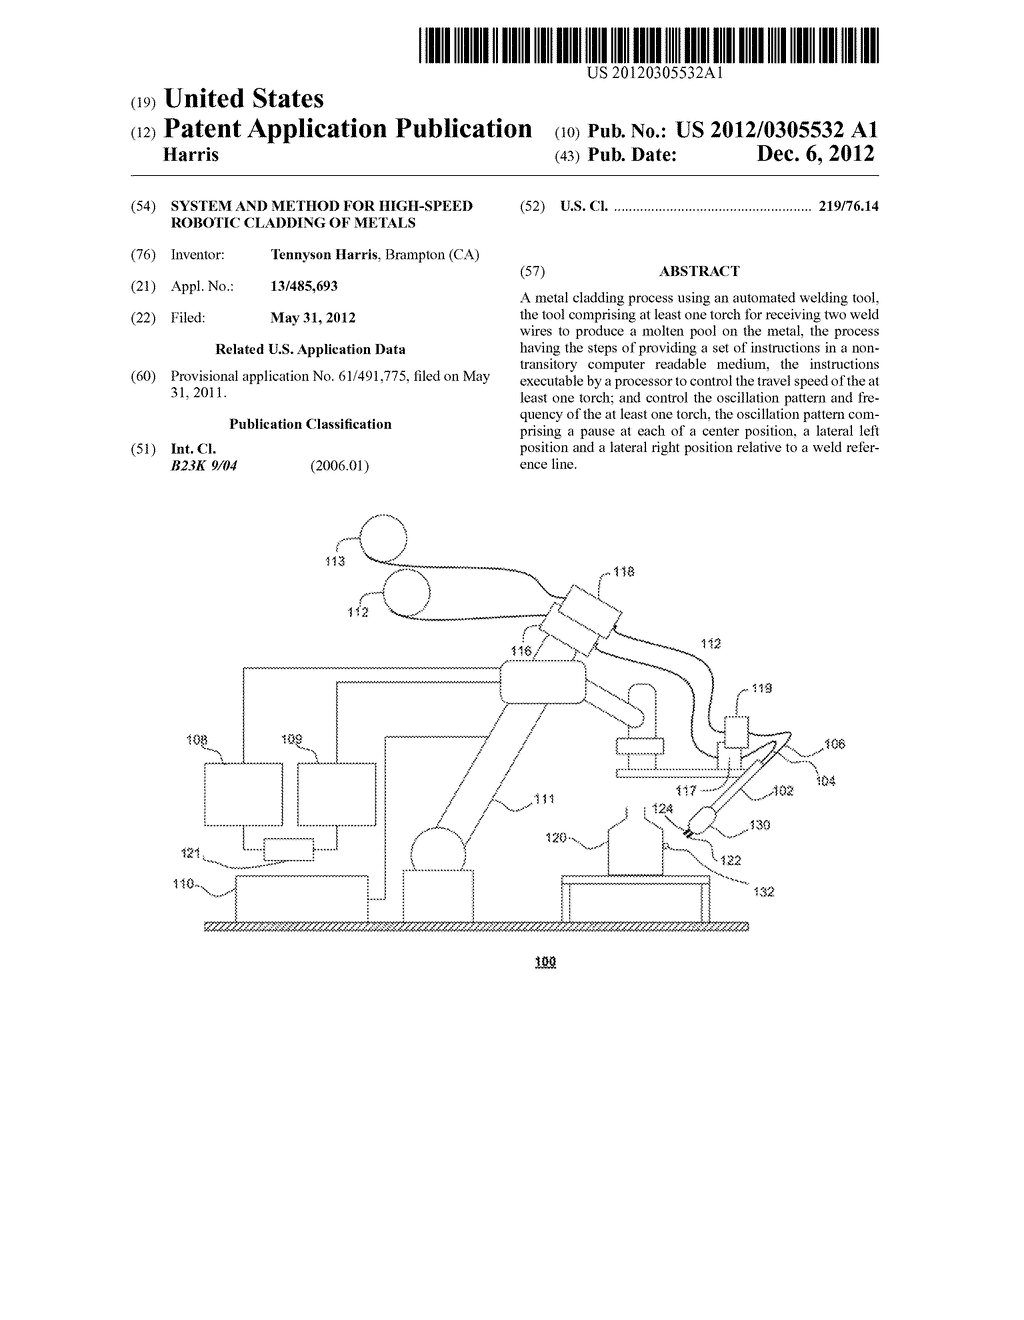 System and Method for High-Speed Robotic Cladding of Metals - diagram, schematic, and image 01